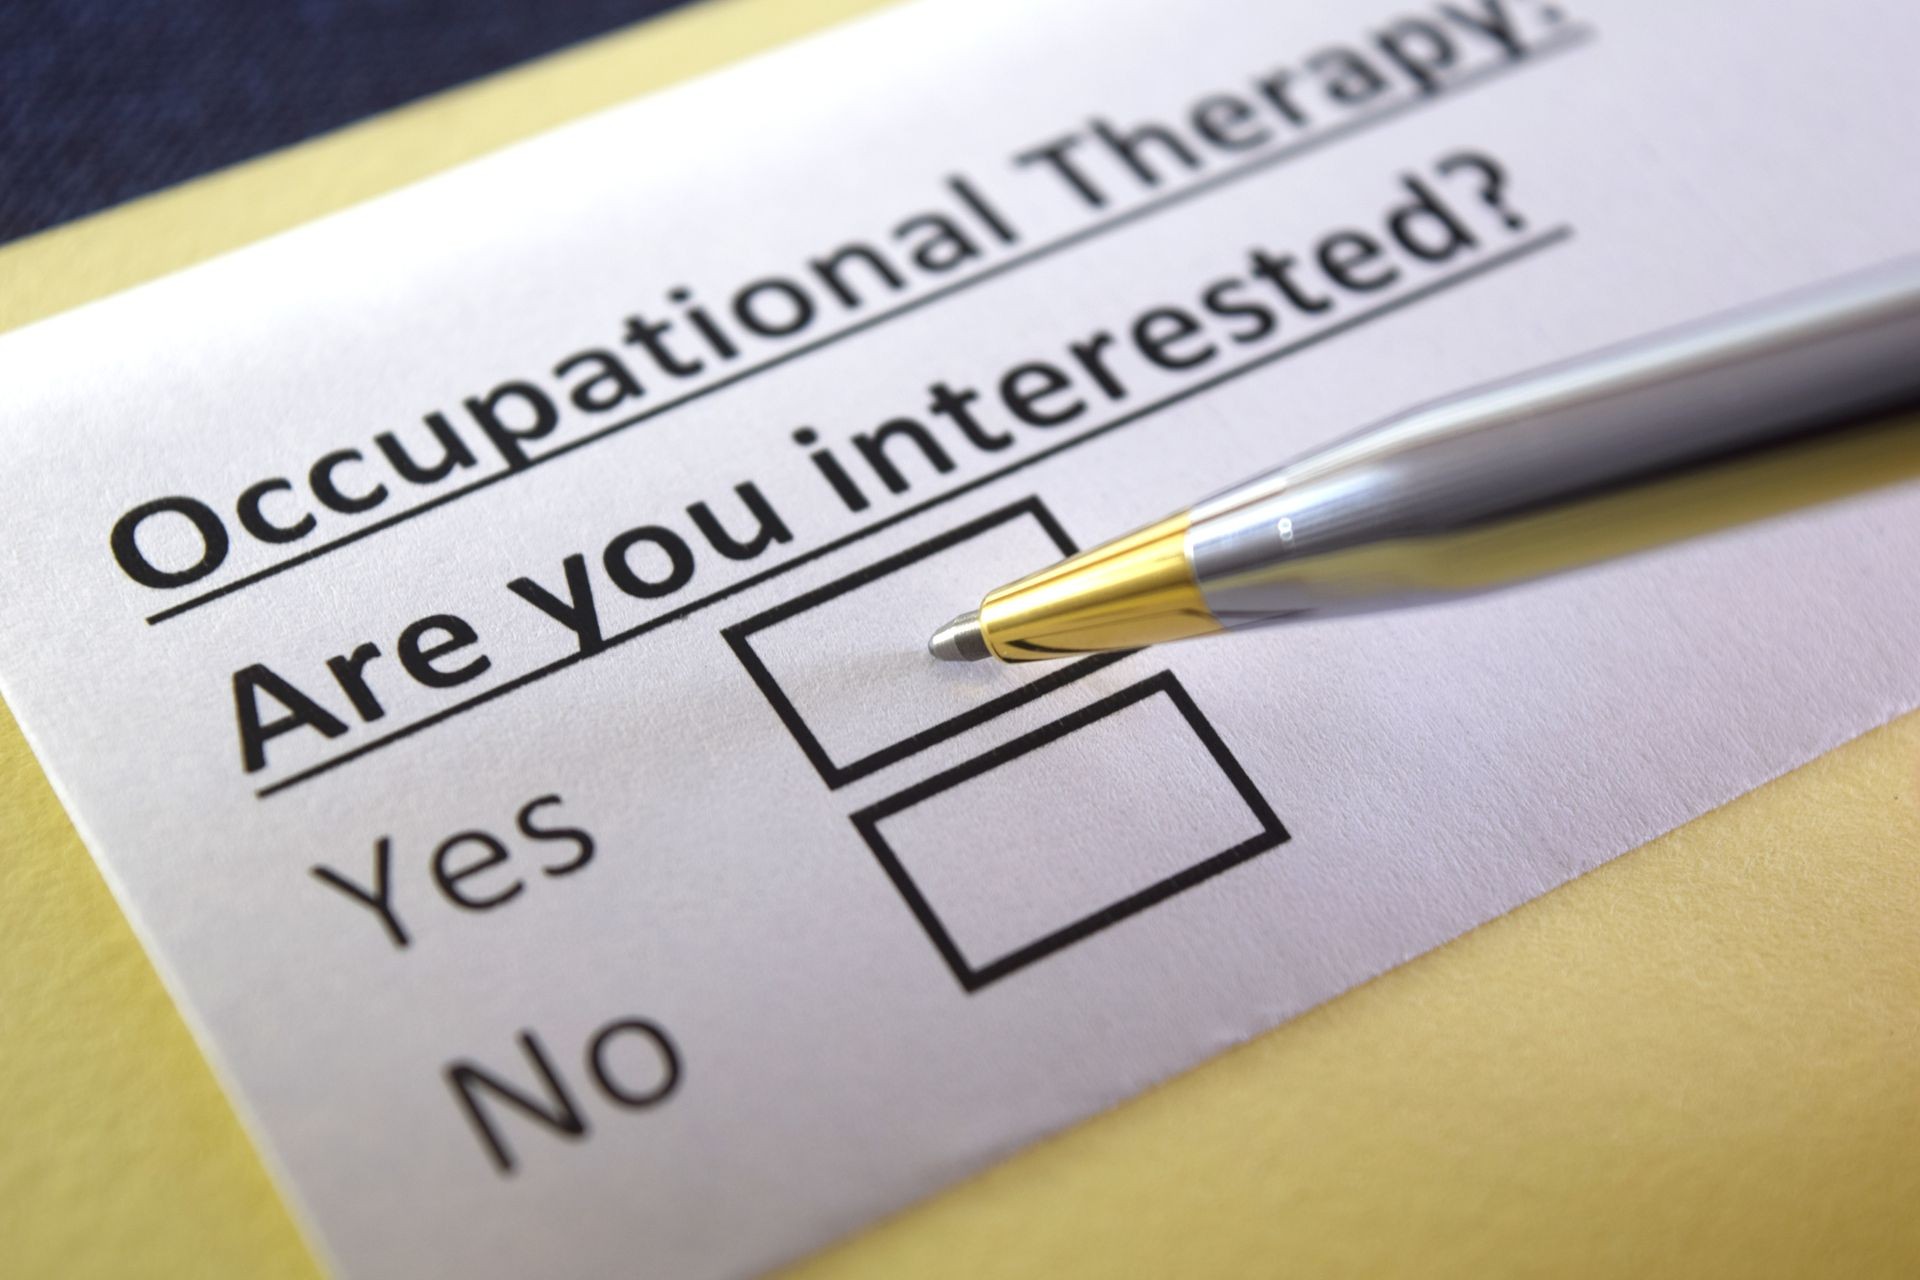  Occupational therapy: Are you interested? yes or no